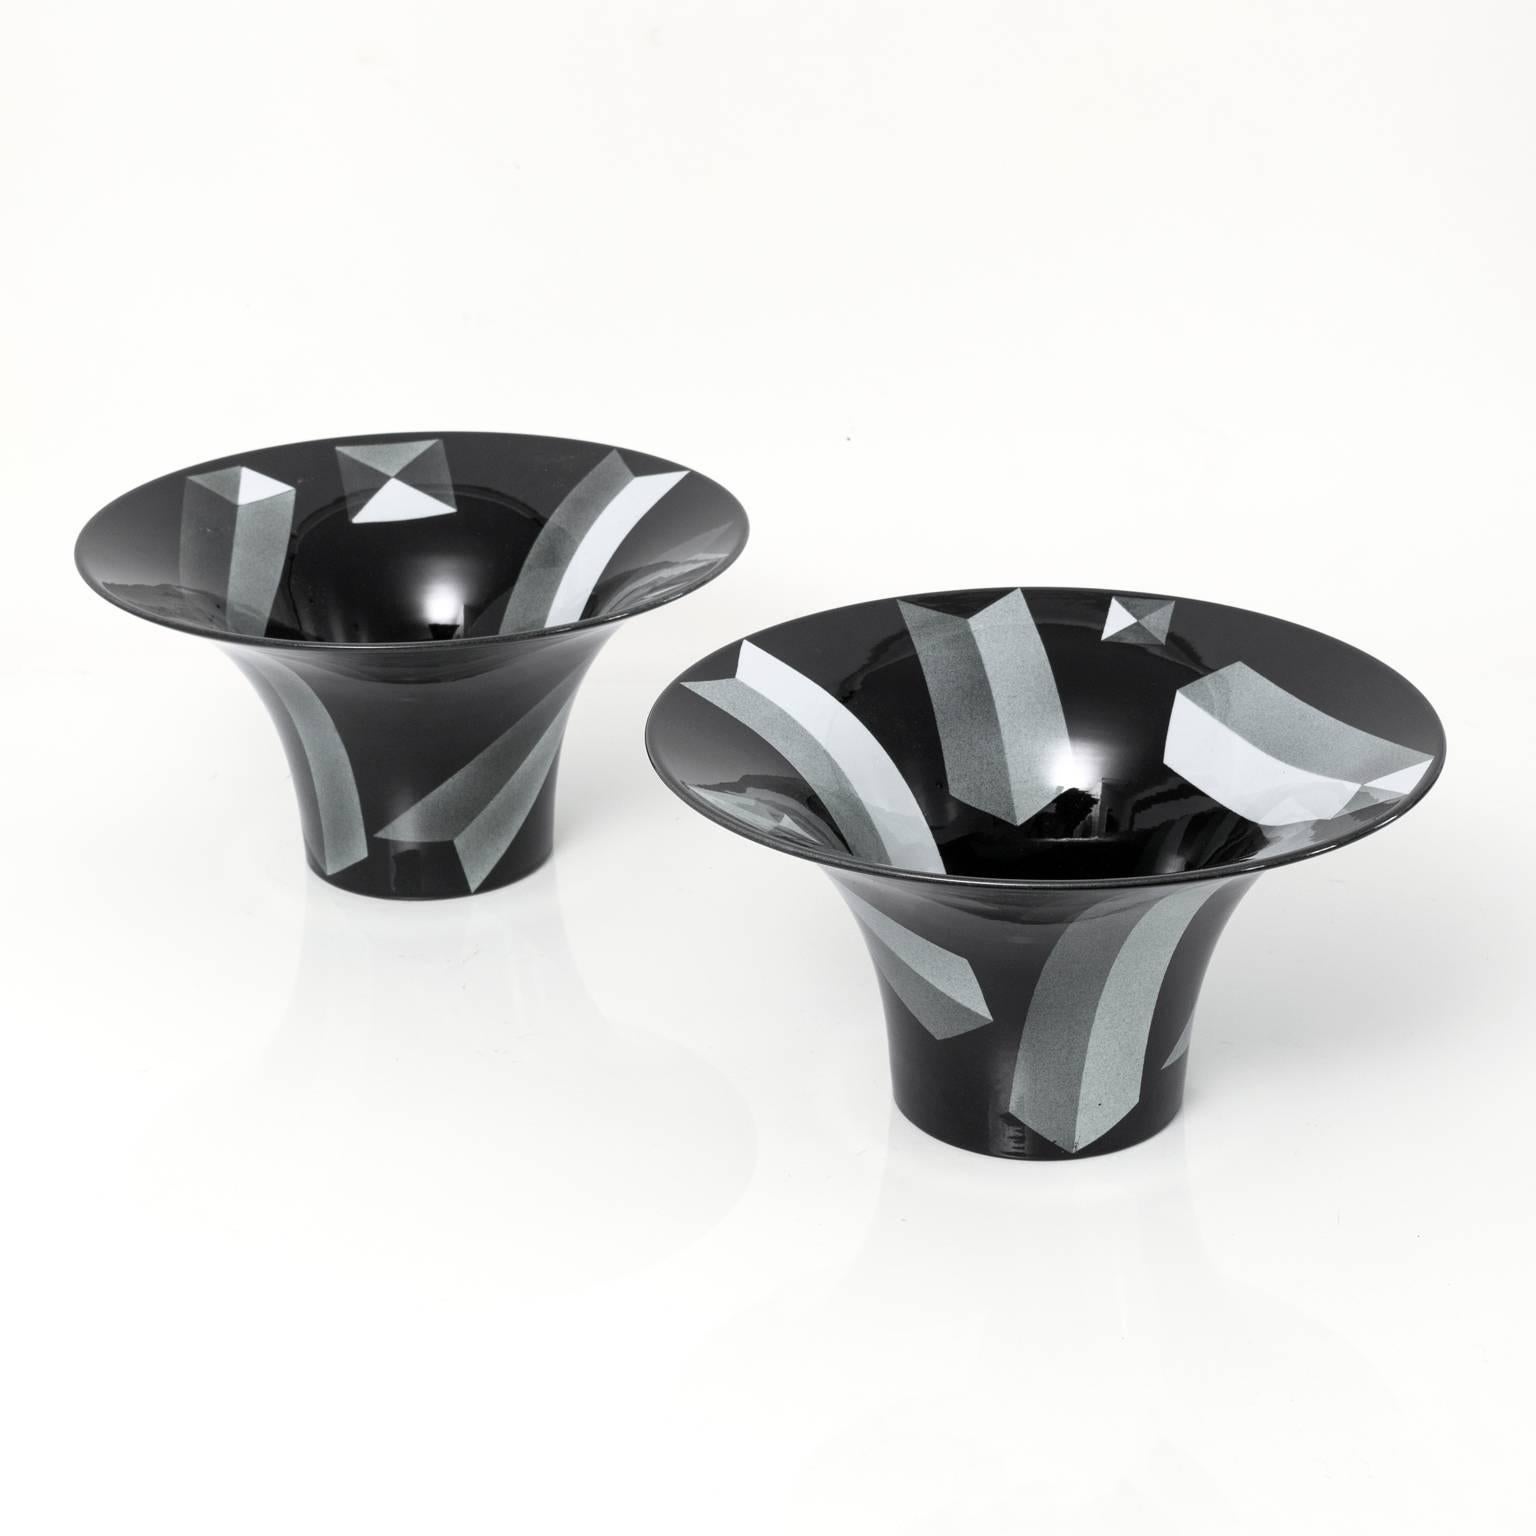 A matching pair of large beautiful Postmodern porcelain bowls by Rolf Sinnemark for Rörstrand, Sweden. The black glazed bowls are decorated on the exterior and interior with depictions of obelisk forms.

Measure: Height 6